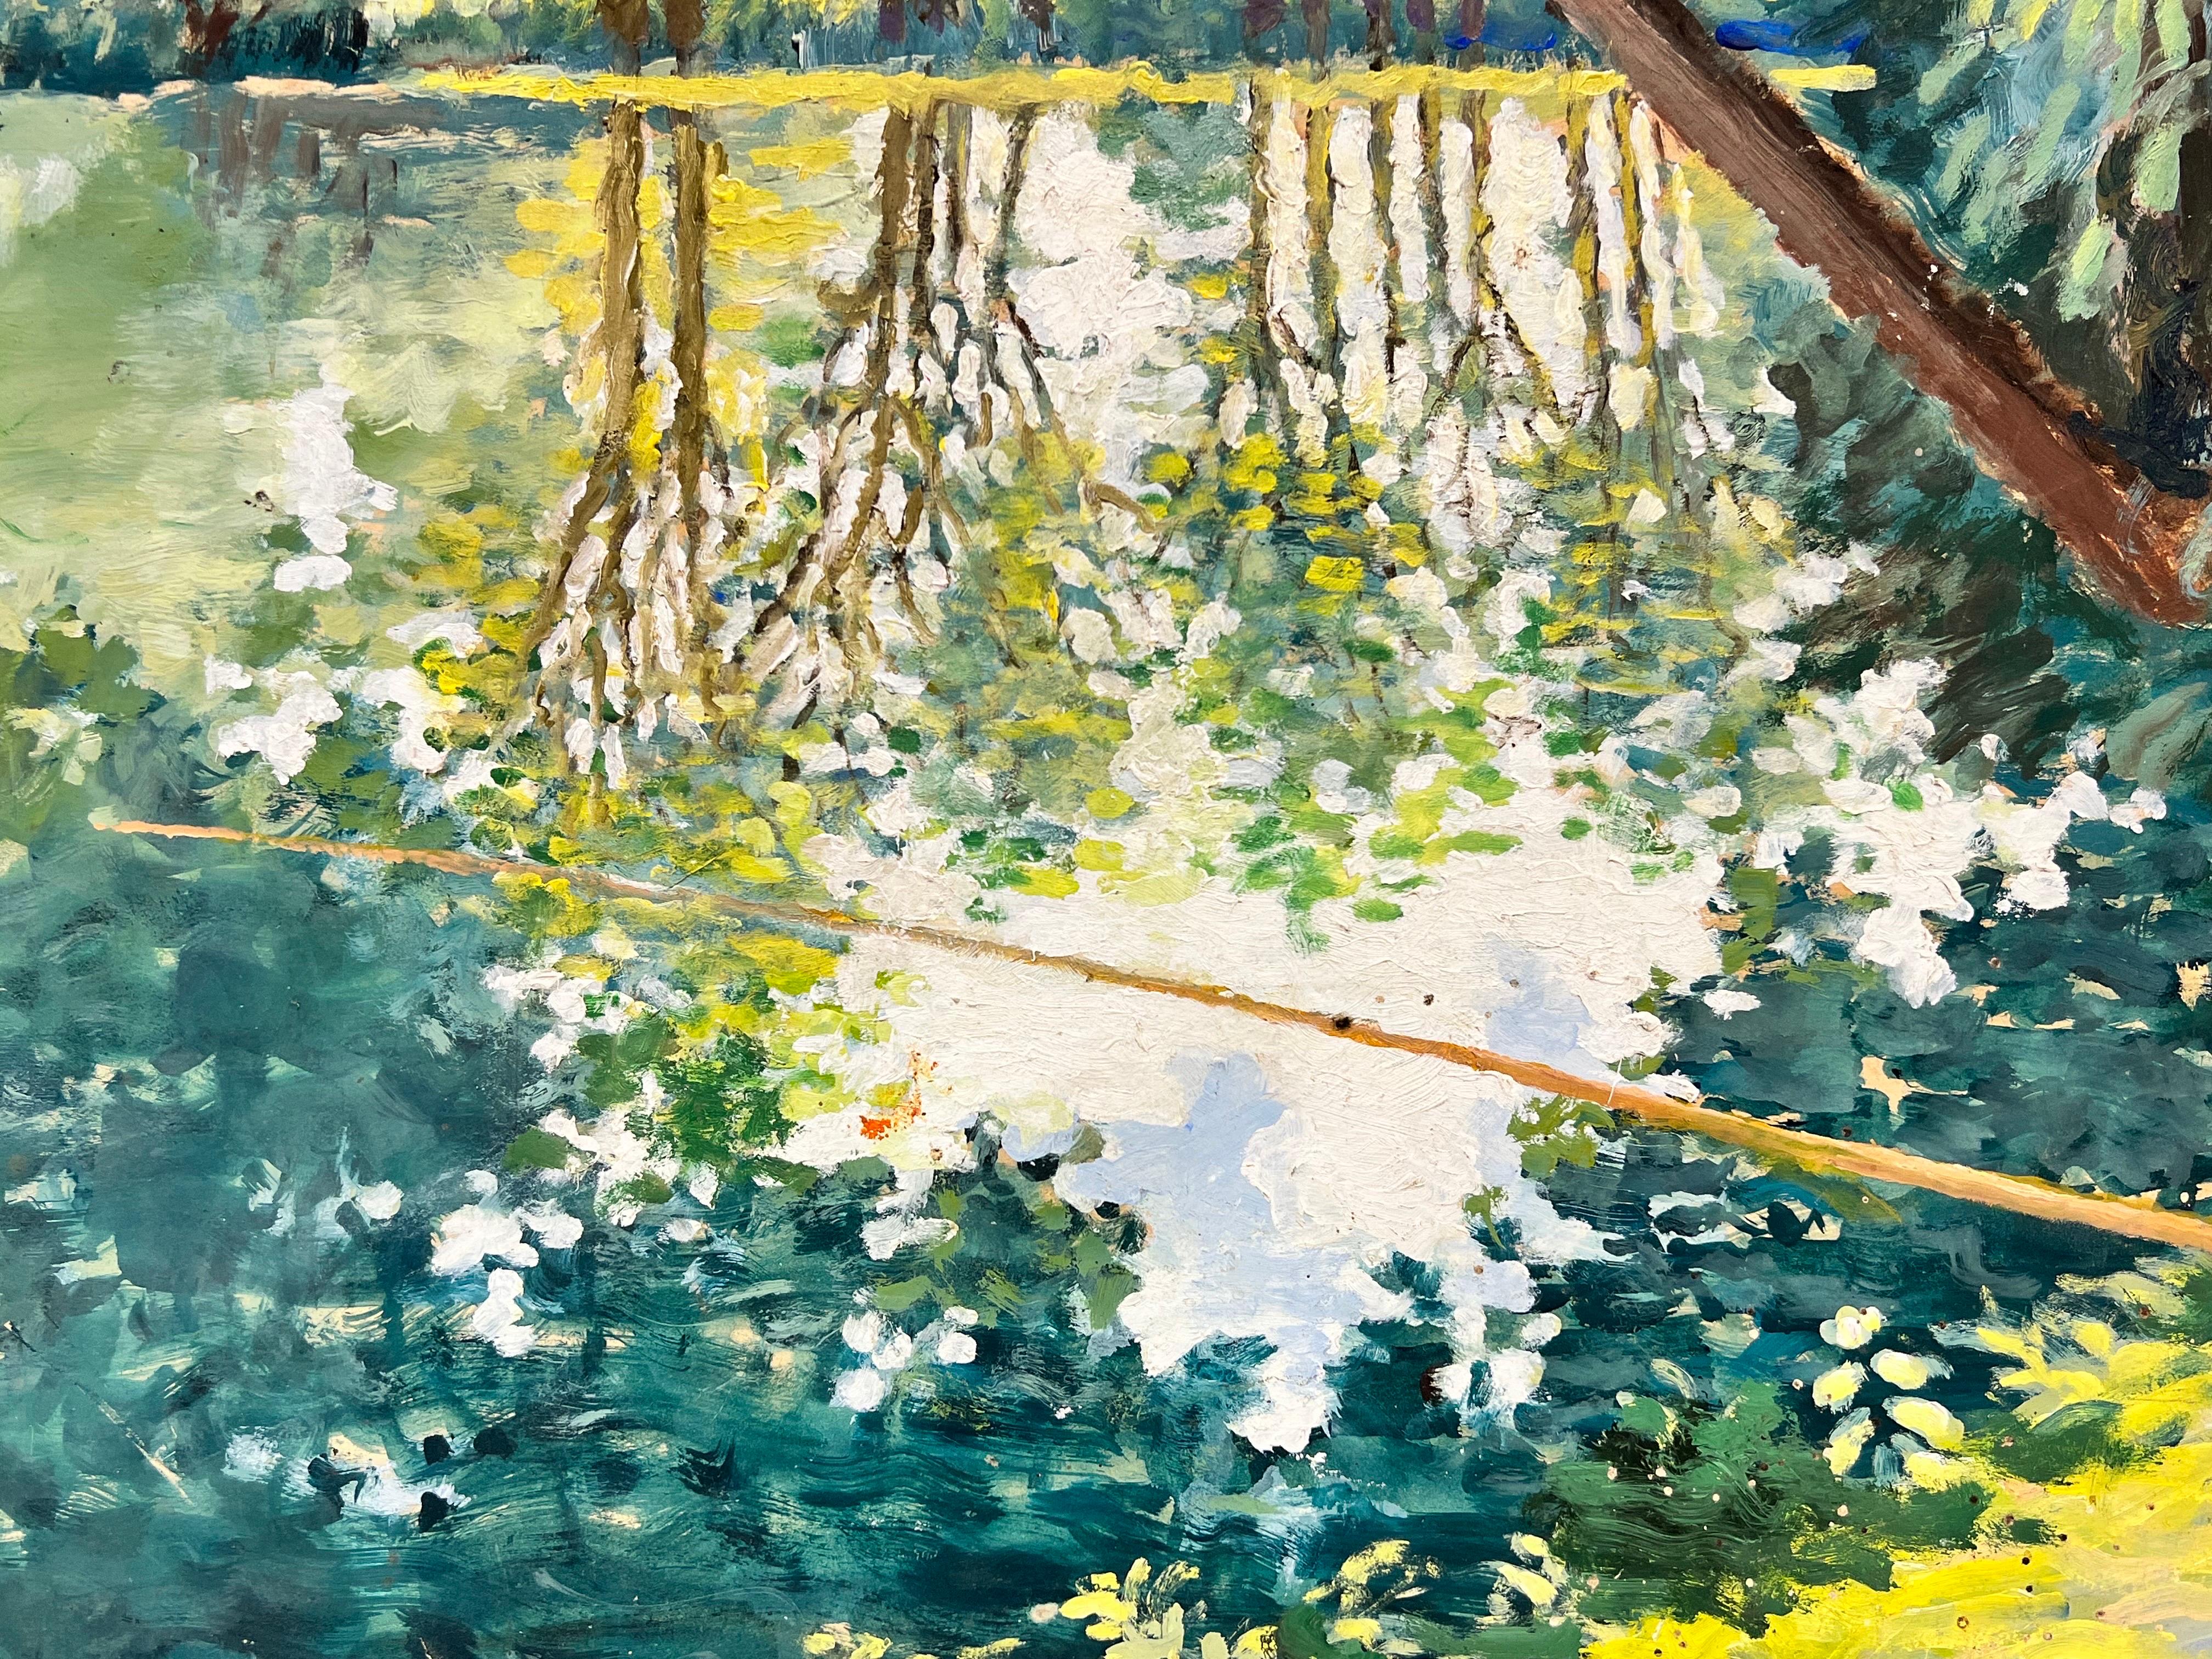 Artist/ School: French School, mid 20th century

Title: The Fisherman; mid century Impressionist work depicting this fisherman on the riverbank. Beautiful shades of light amongst a range of green and yellow colors. 

Medium: oil painting on thin